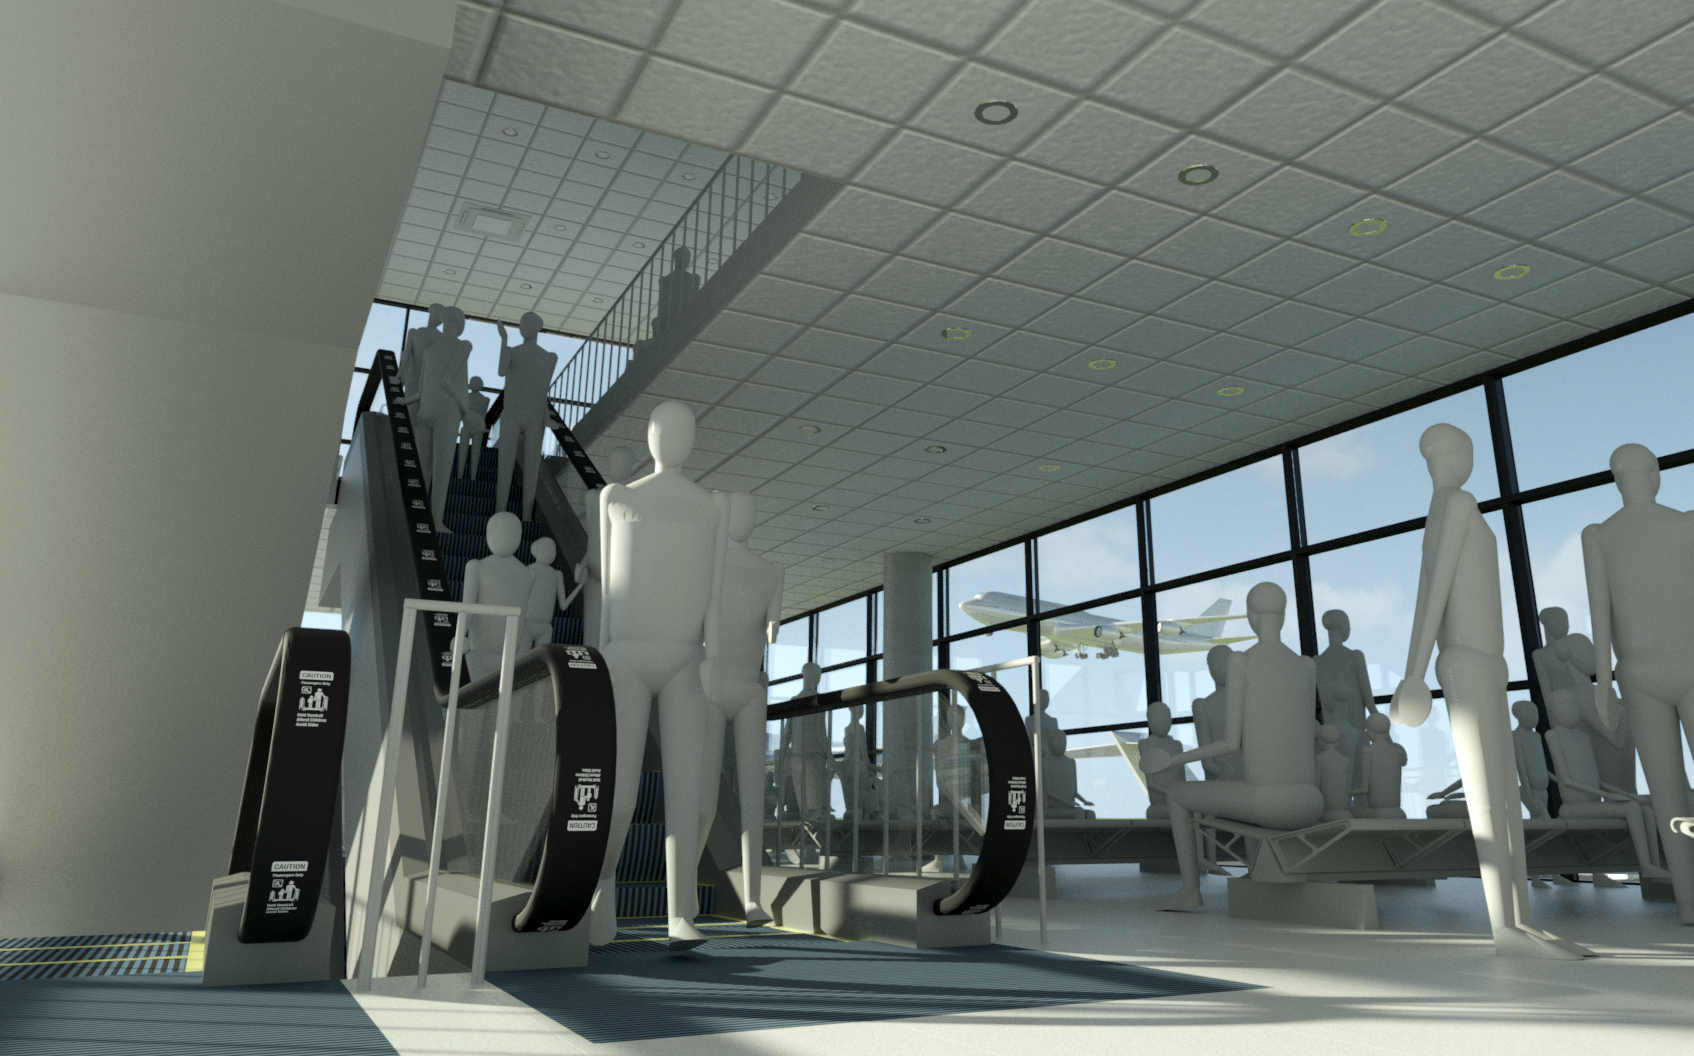 Revit rendering showing escalator and Andy in airport scene.